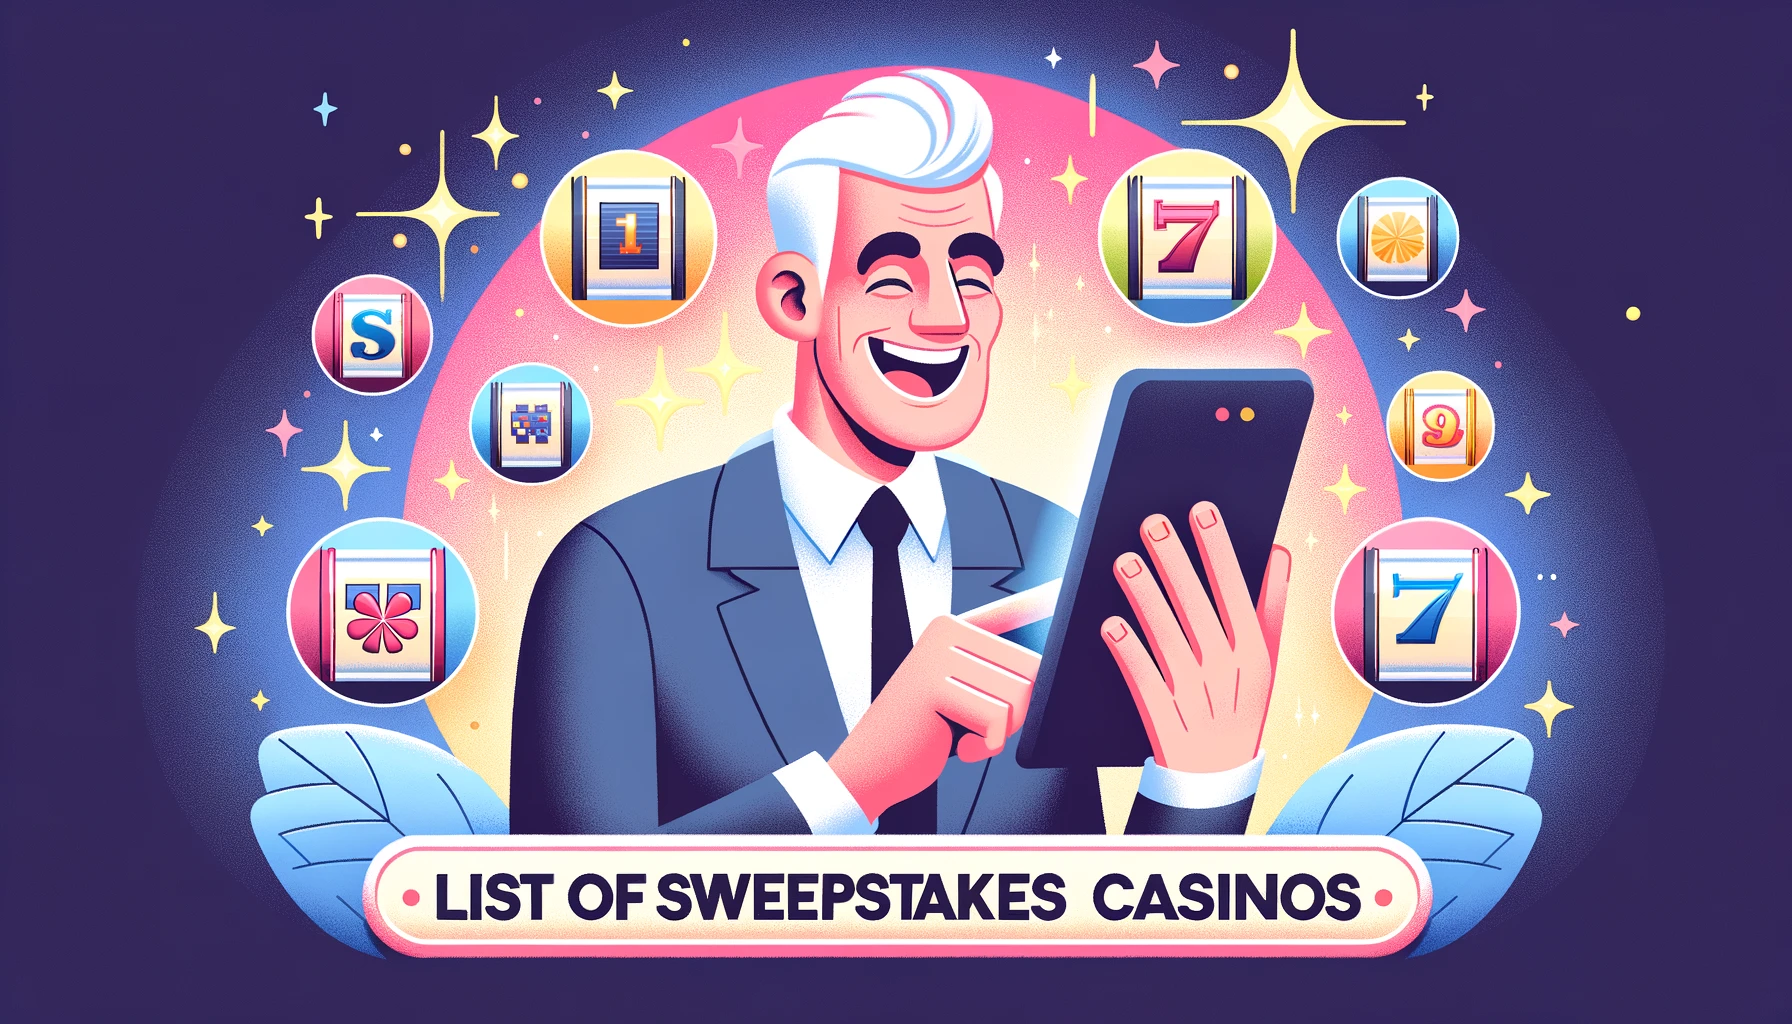 List of sweepstakes casinos